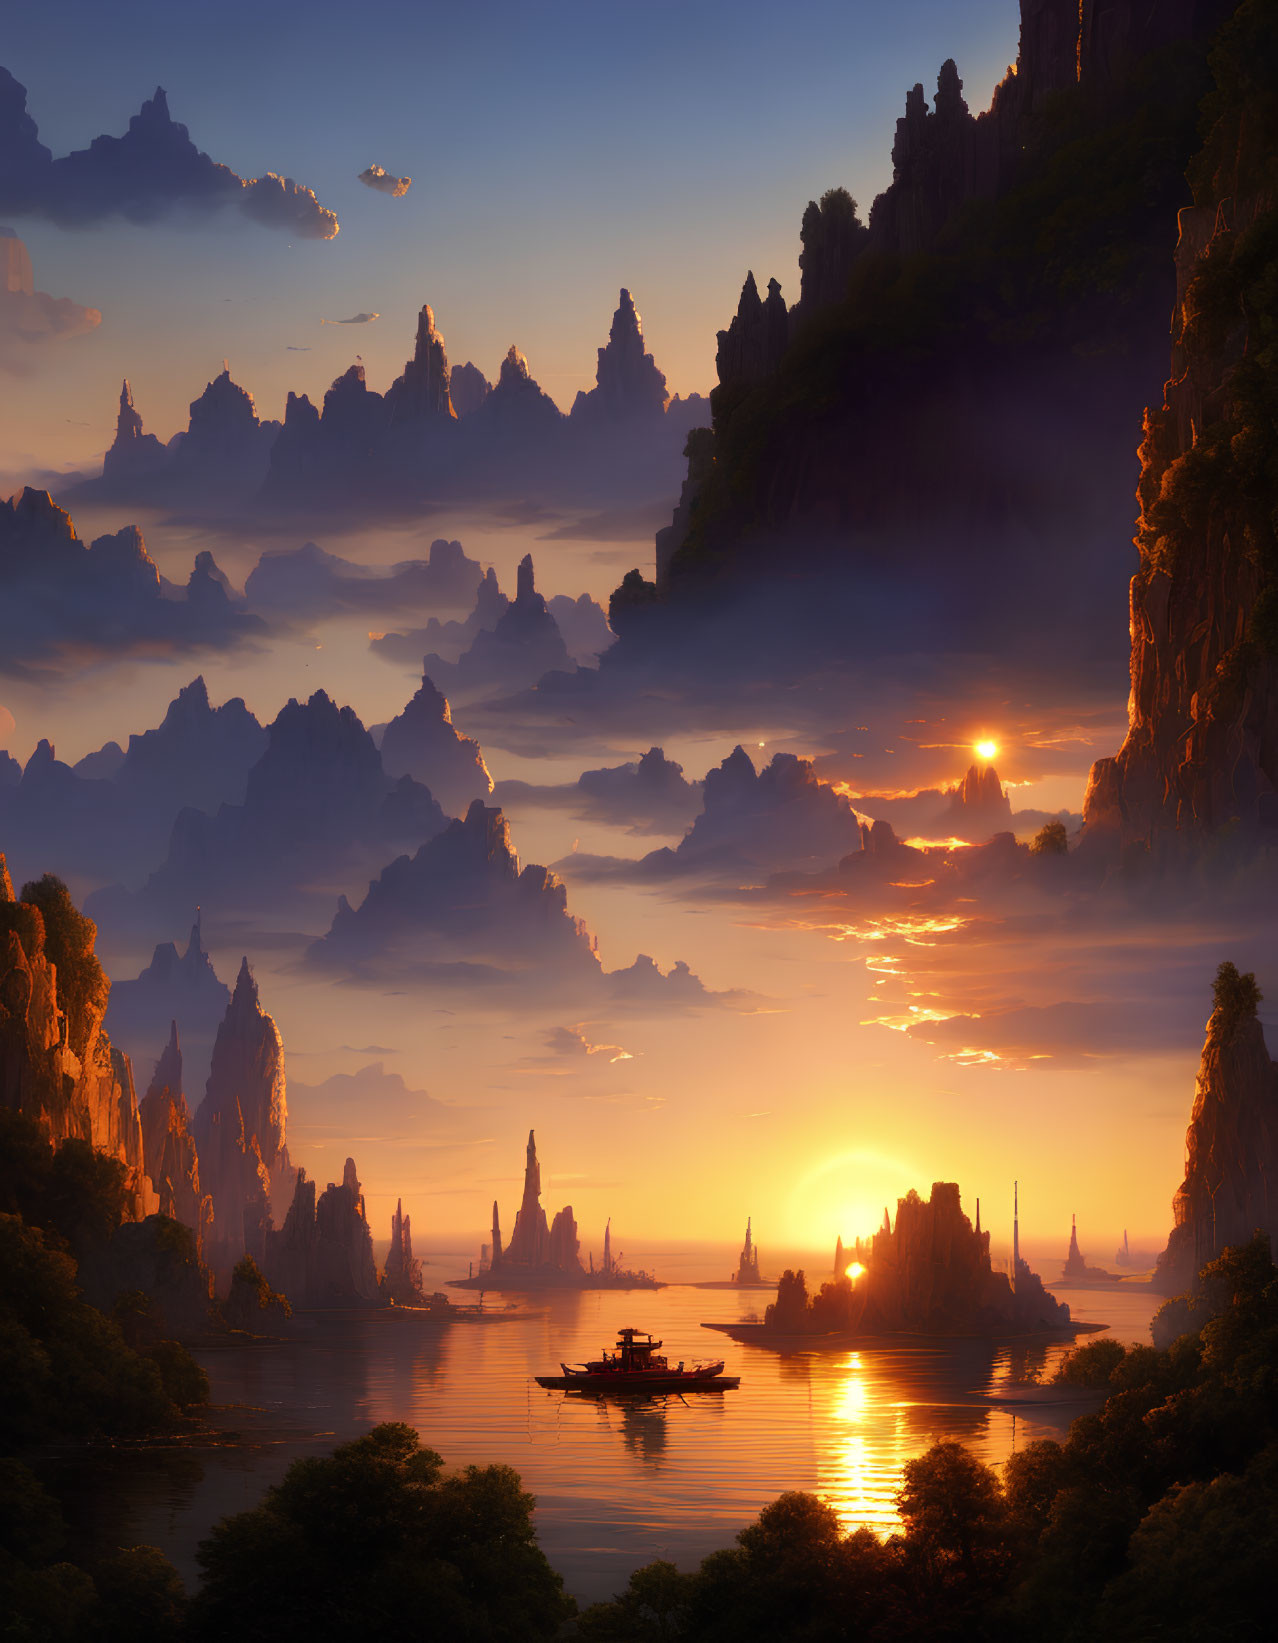 Tranquil sunset over serene river with cliffs and boat